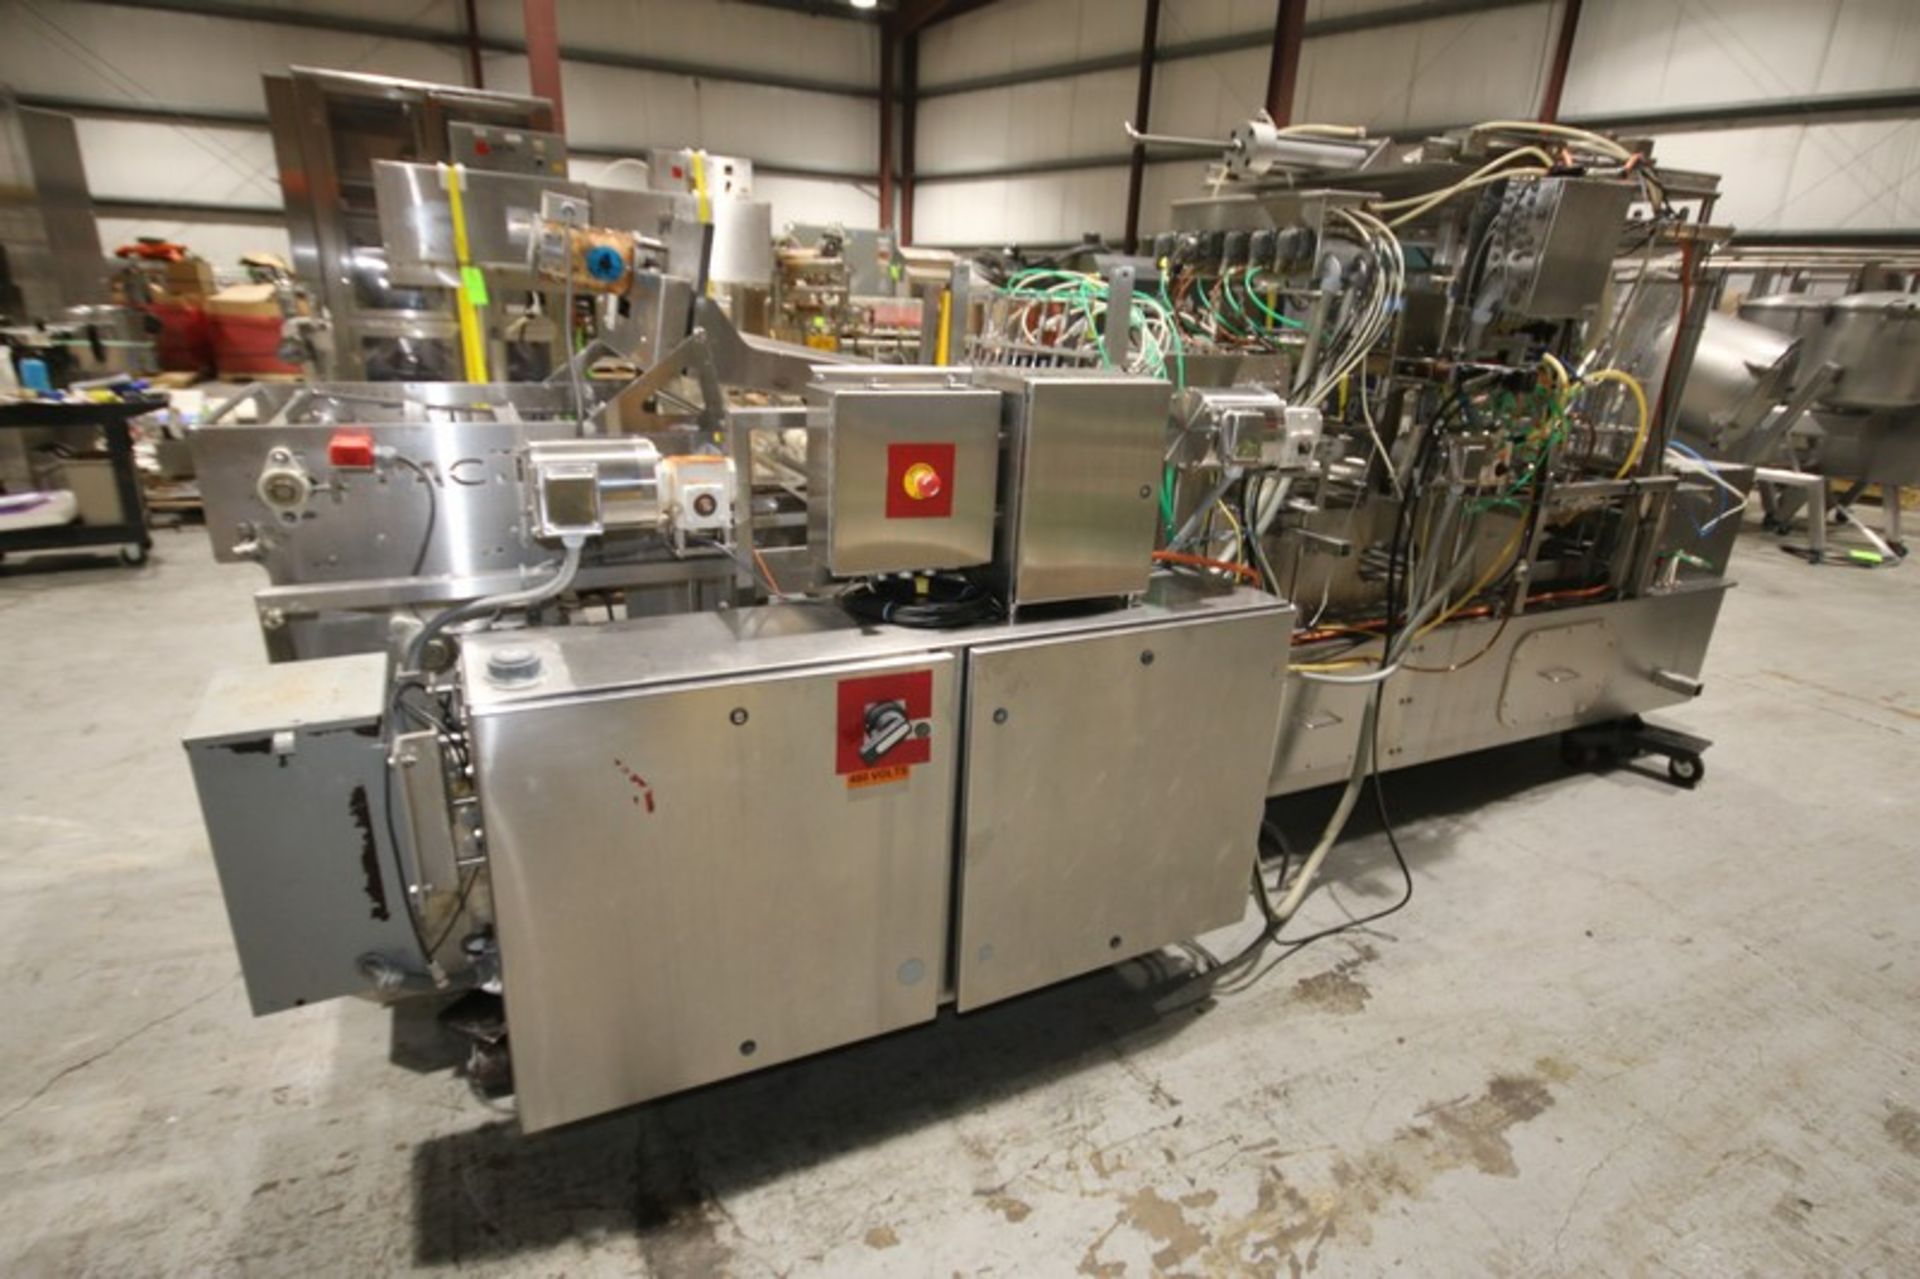 2008 PAC Tec 4 - Wide S/S Cup Filler, SN 2201, with 4 1/4" W Change Parts, Cup Inserter, Tamper - Image 7 of 13